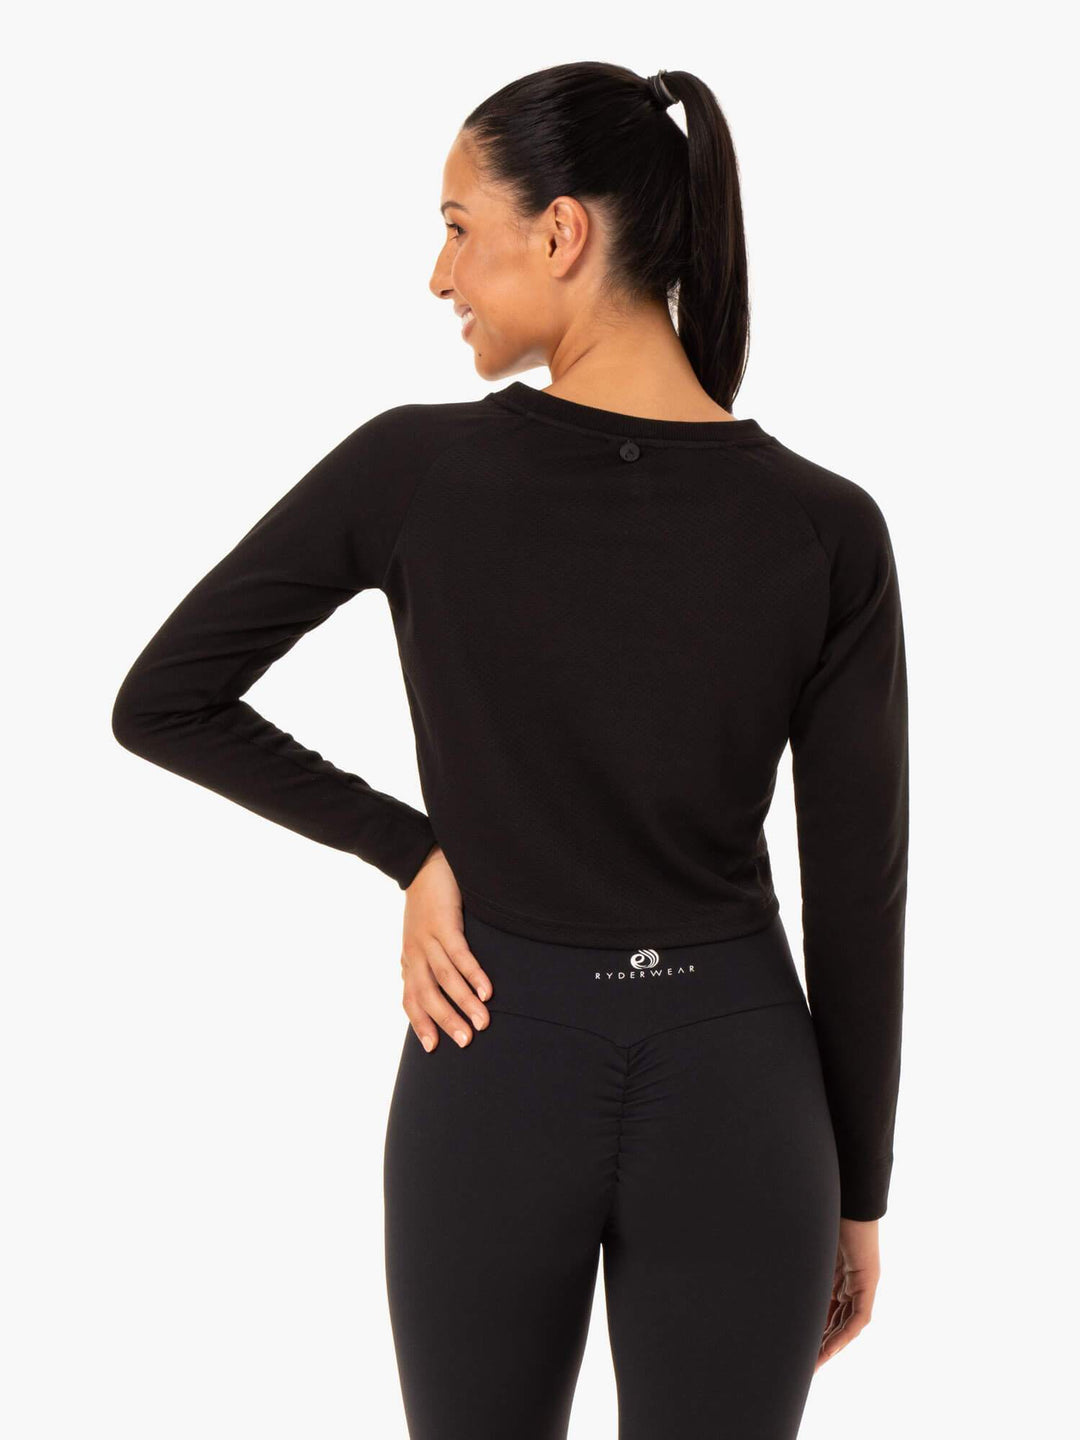 Staples Cropped Sweater - Black Clothing Ryderwear 